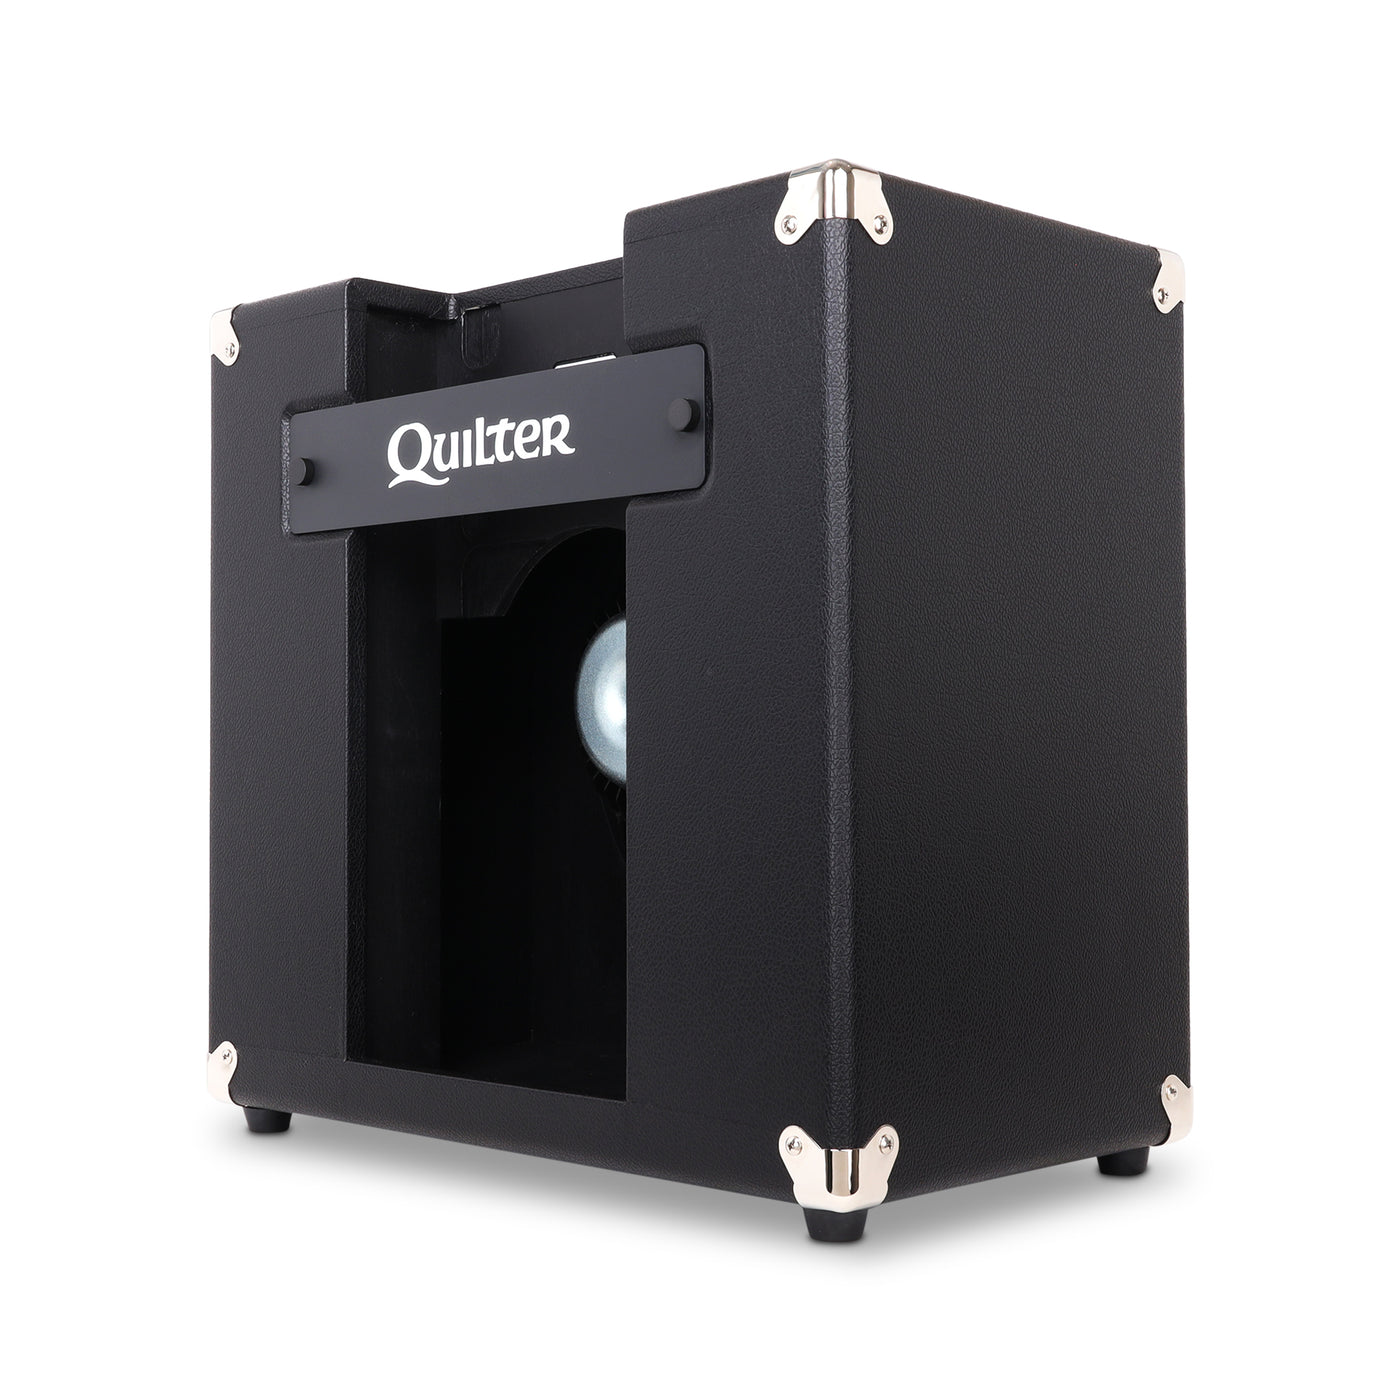 Quilter Labs BlockDock 15 amplifier cabinet - facing away diagonally to the right